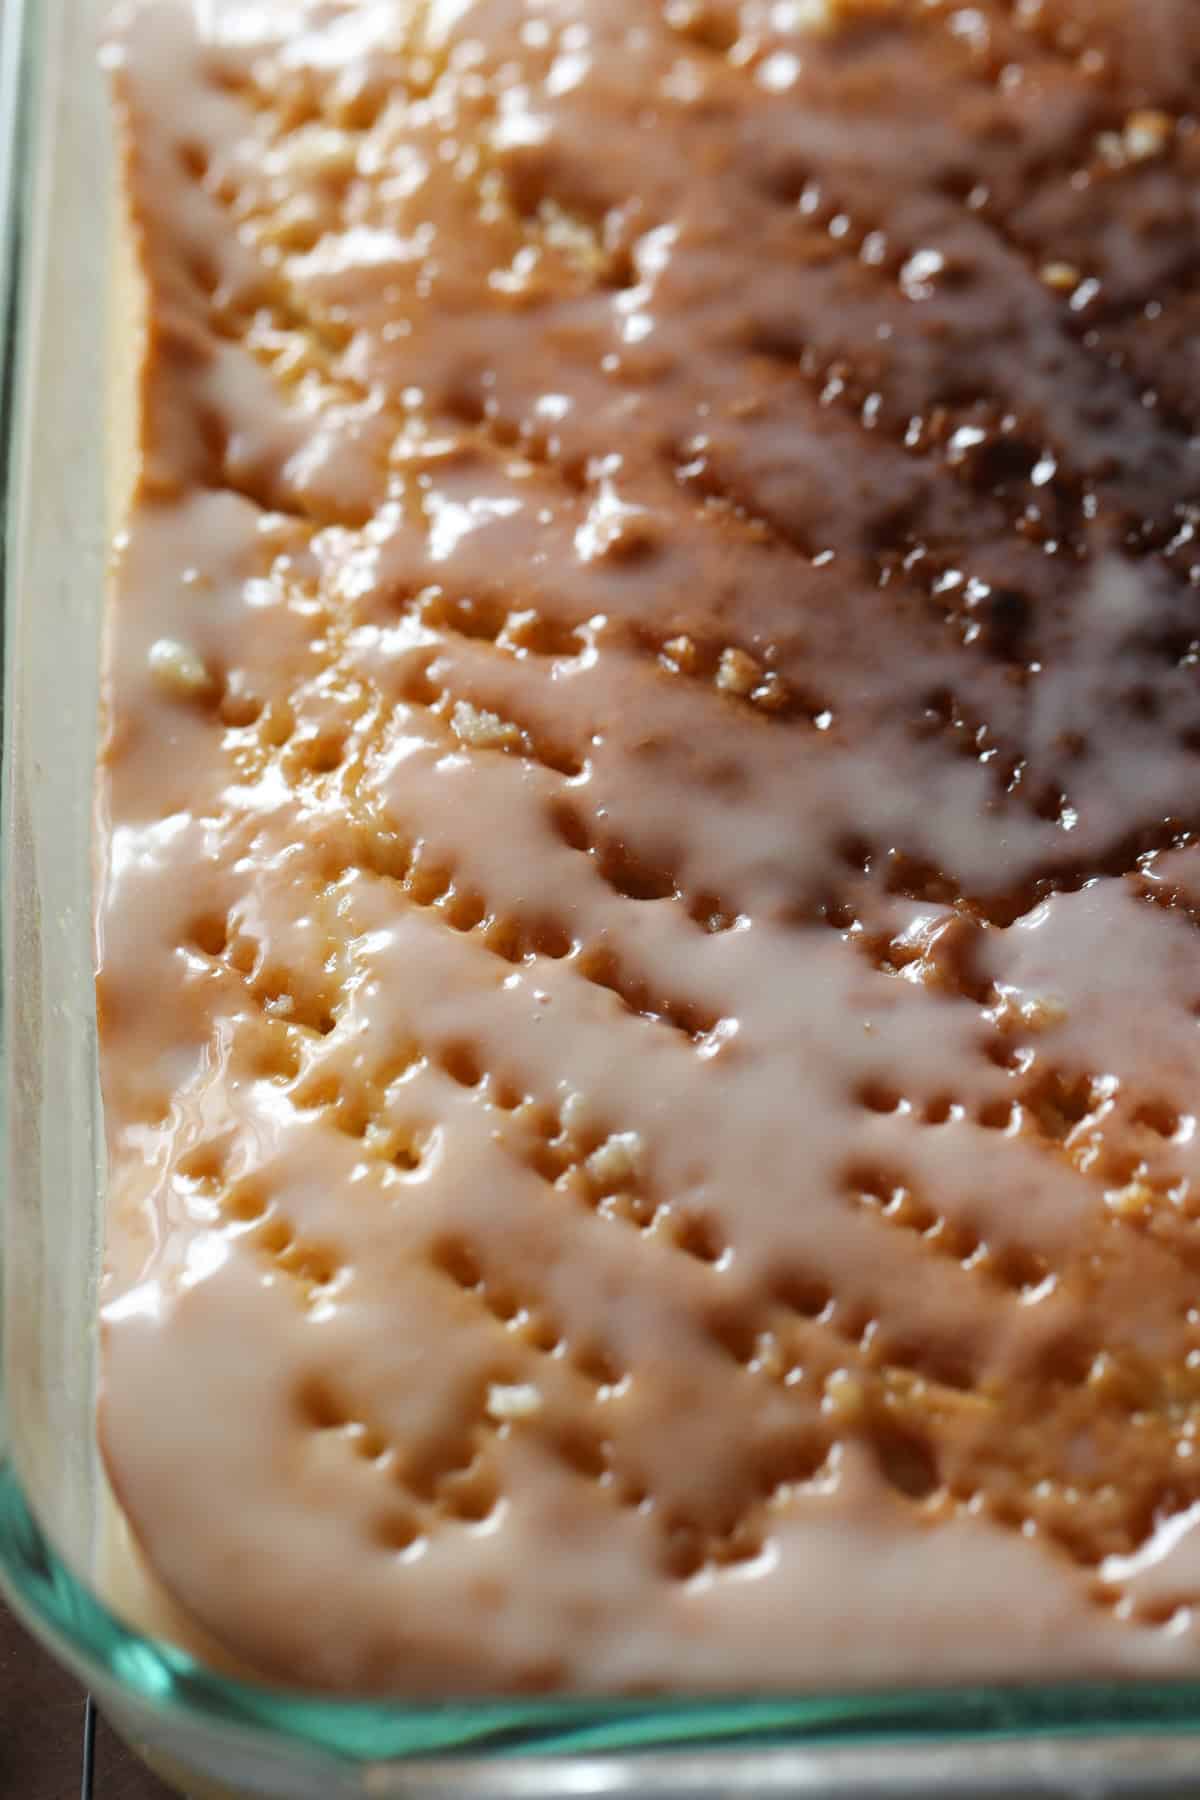 Cake with holes poked in and glaze on top